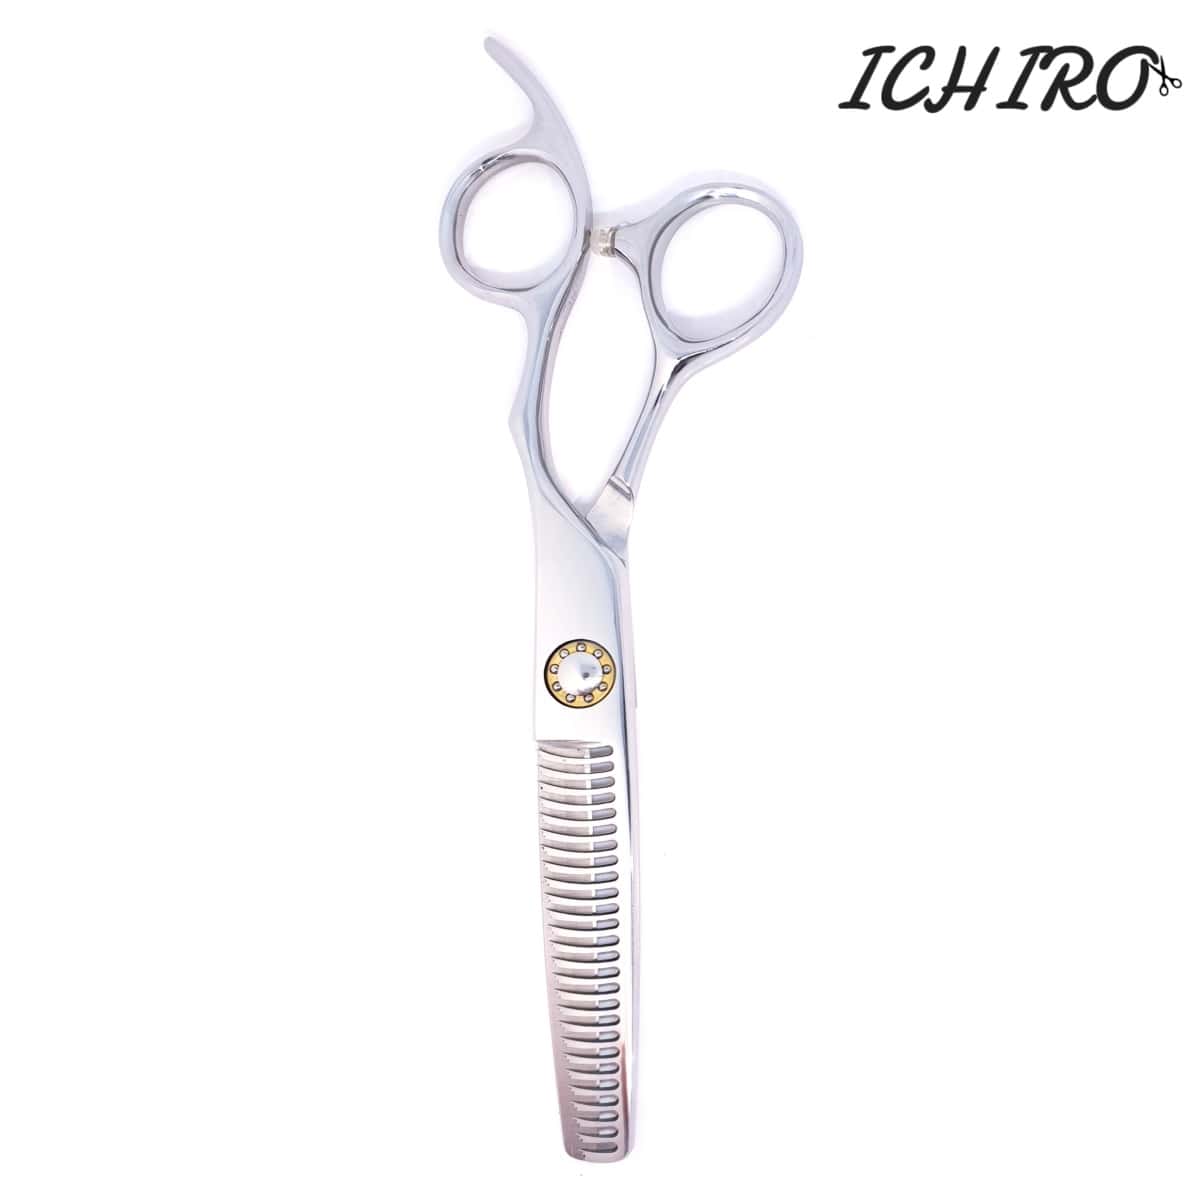 The Ichiro Offset Hair thinning shear for professional hairstylists and barbers